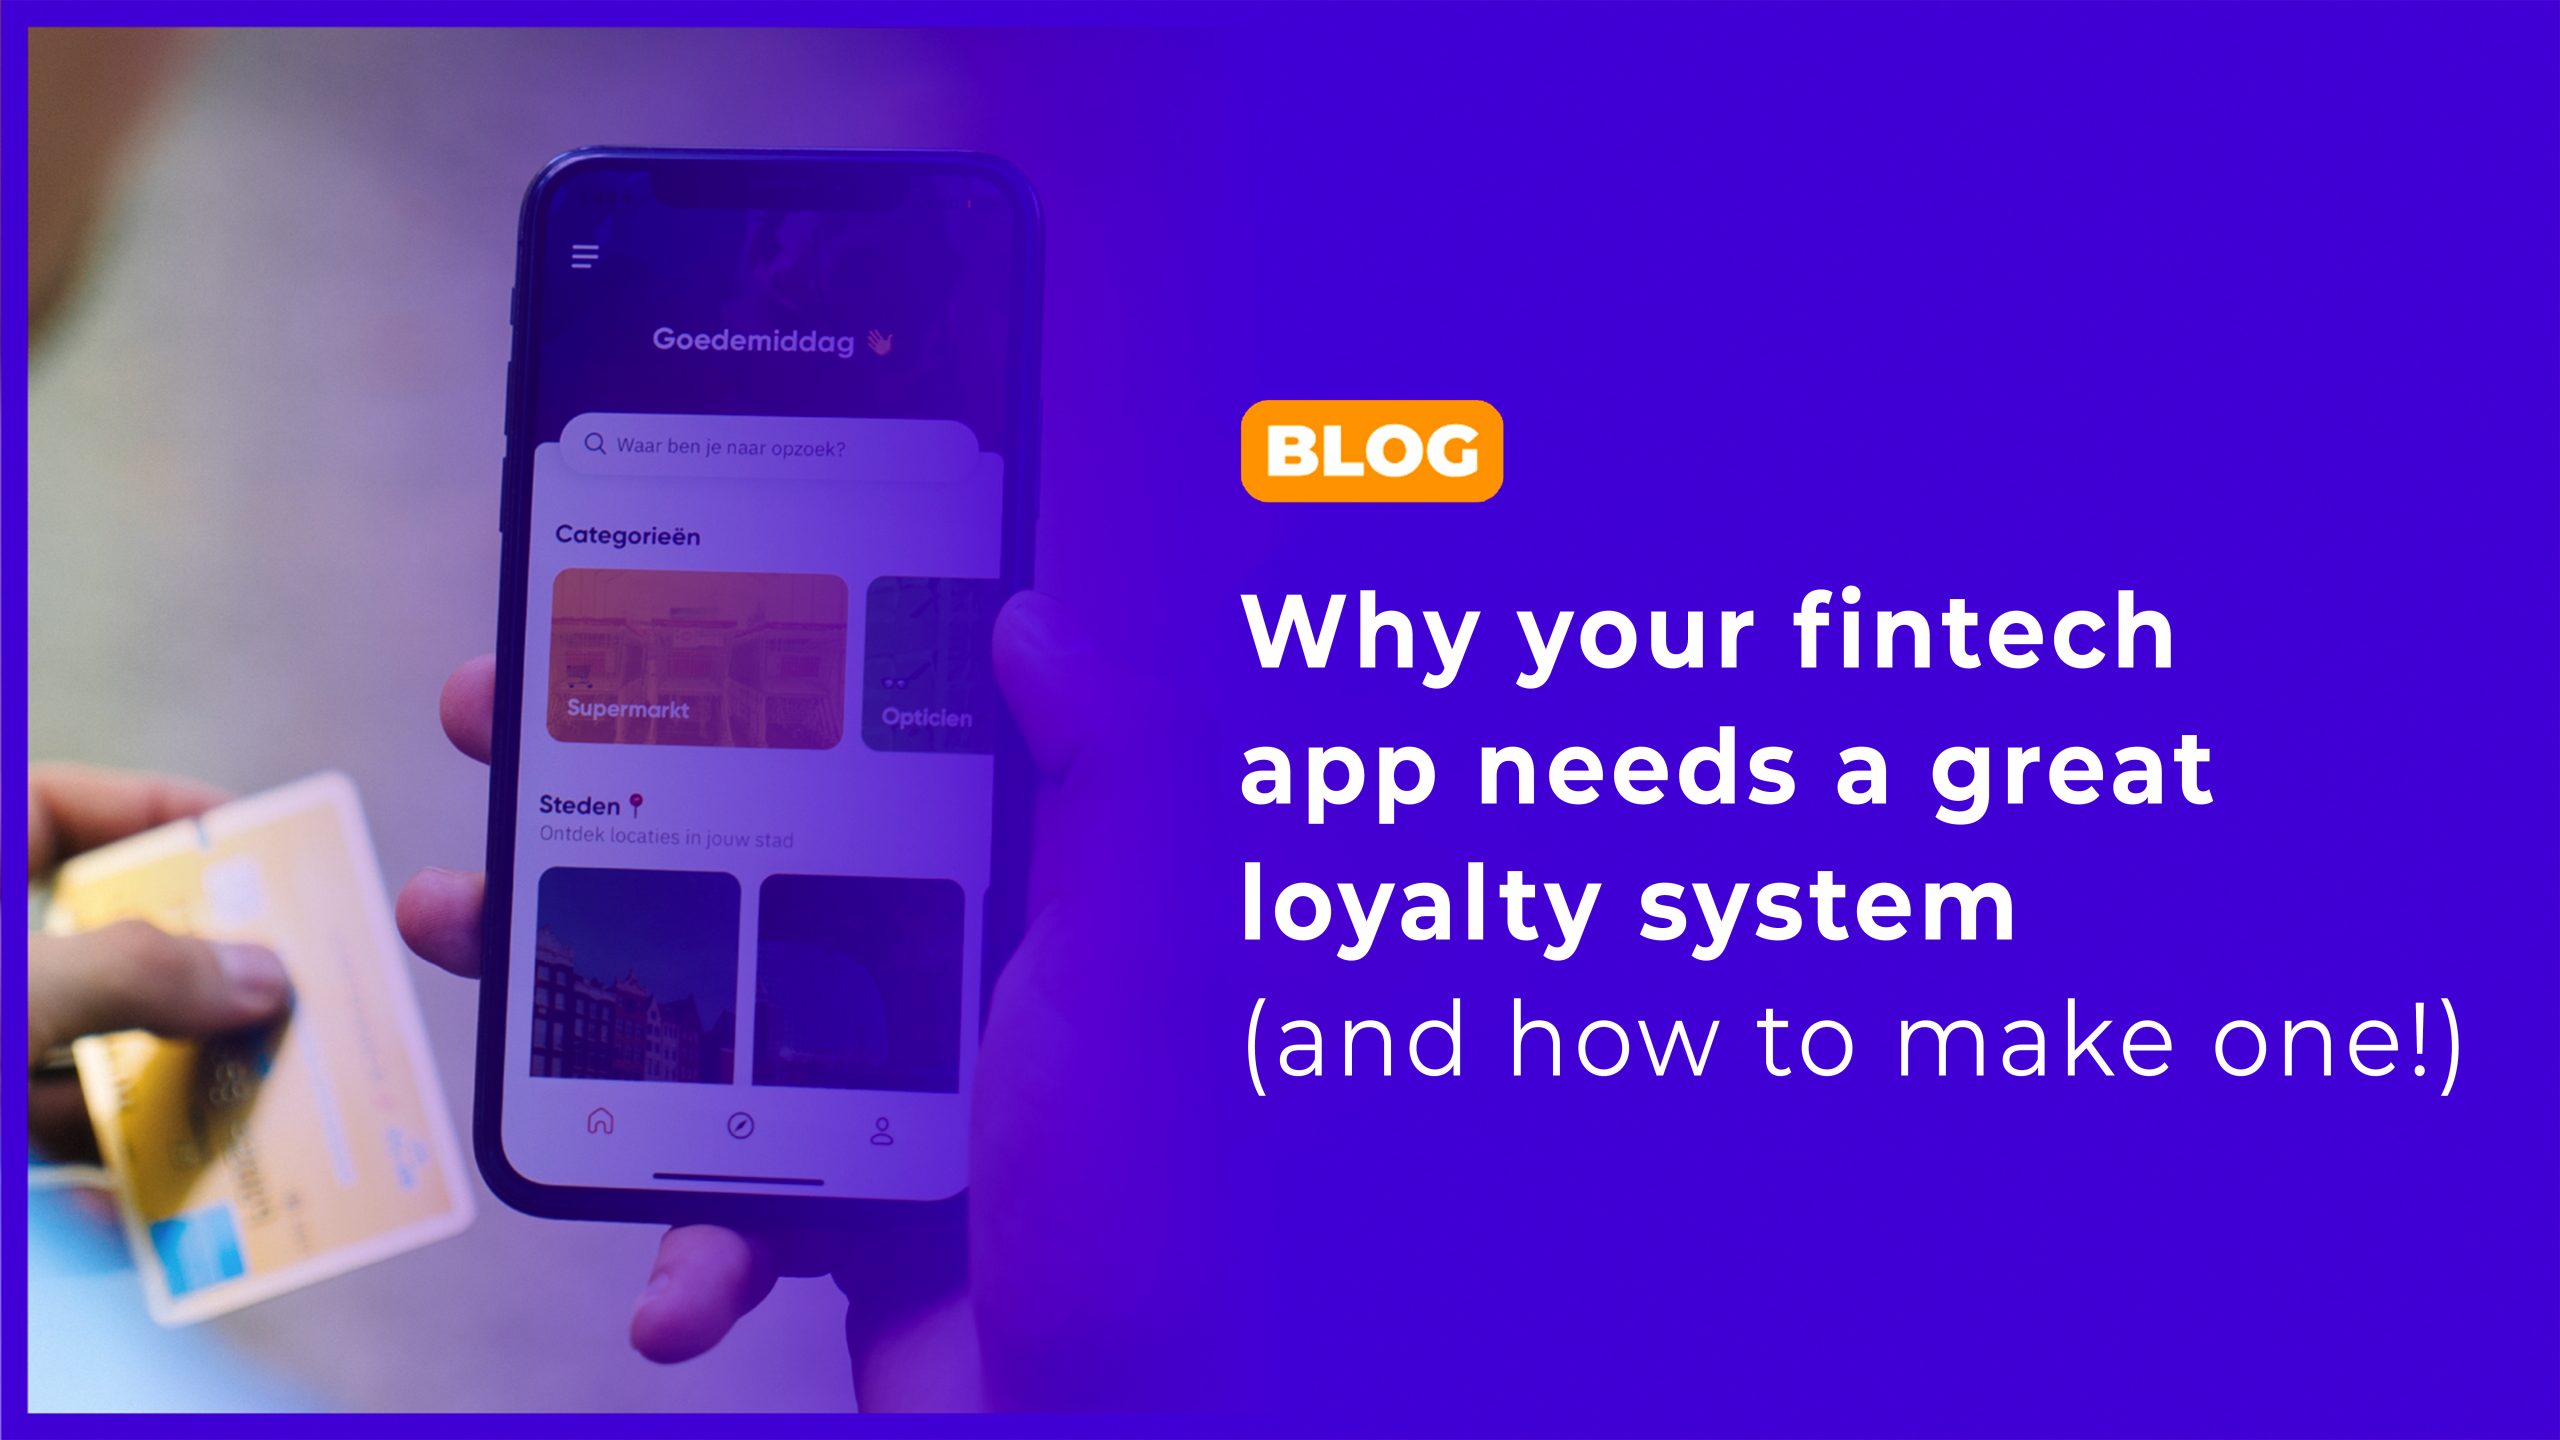 Why your fintech app needs a great loyalty system (and how to make one)